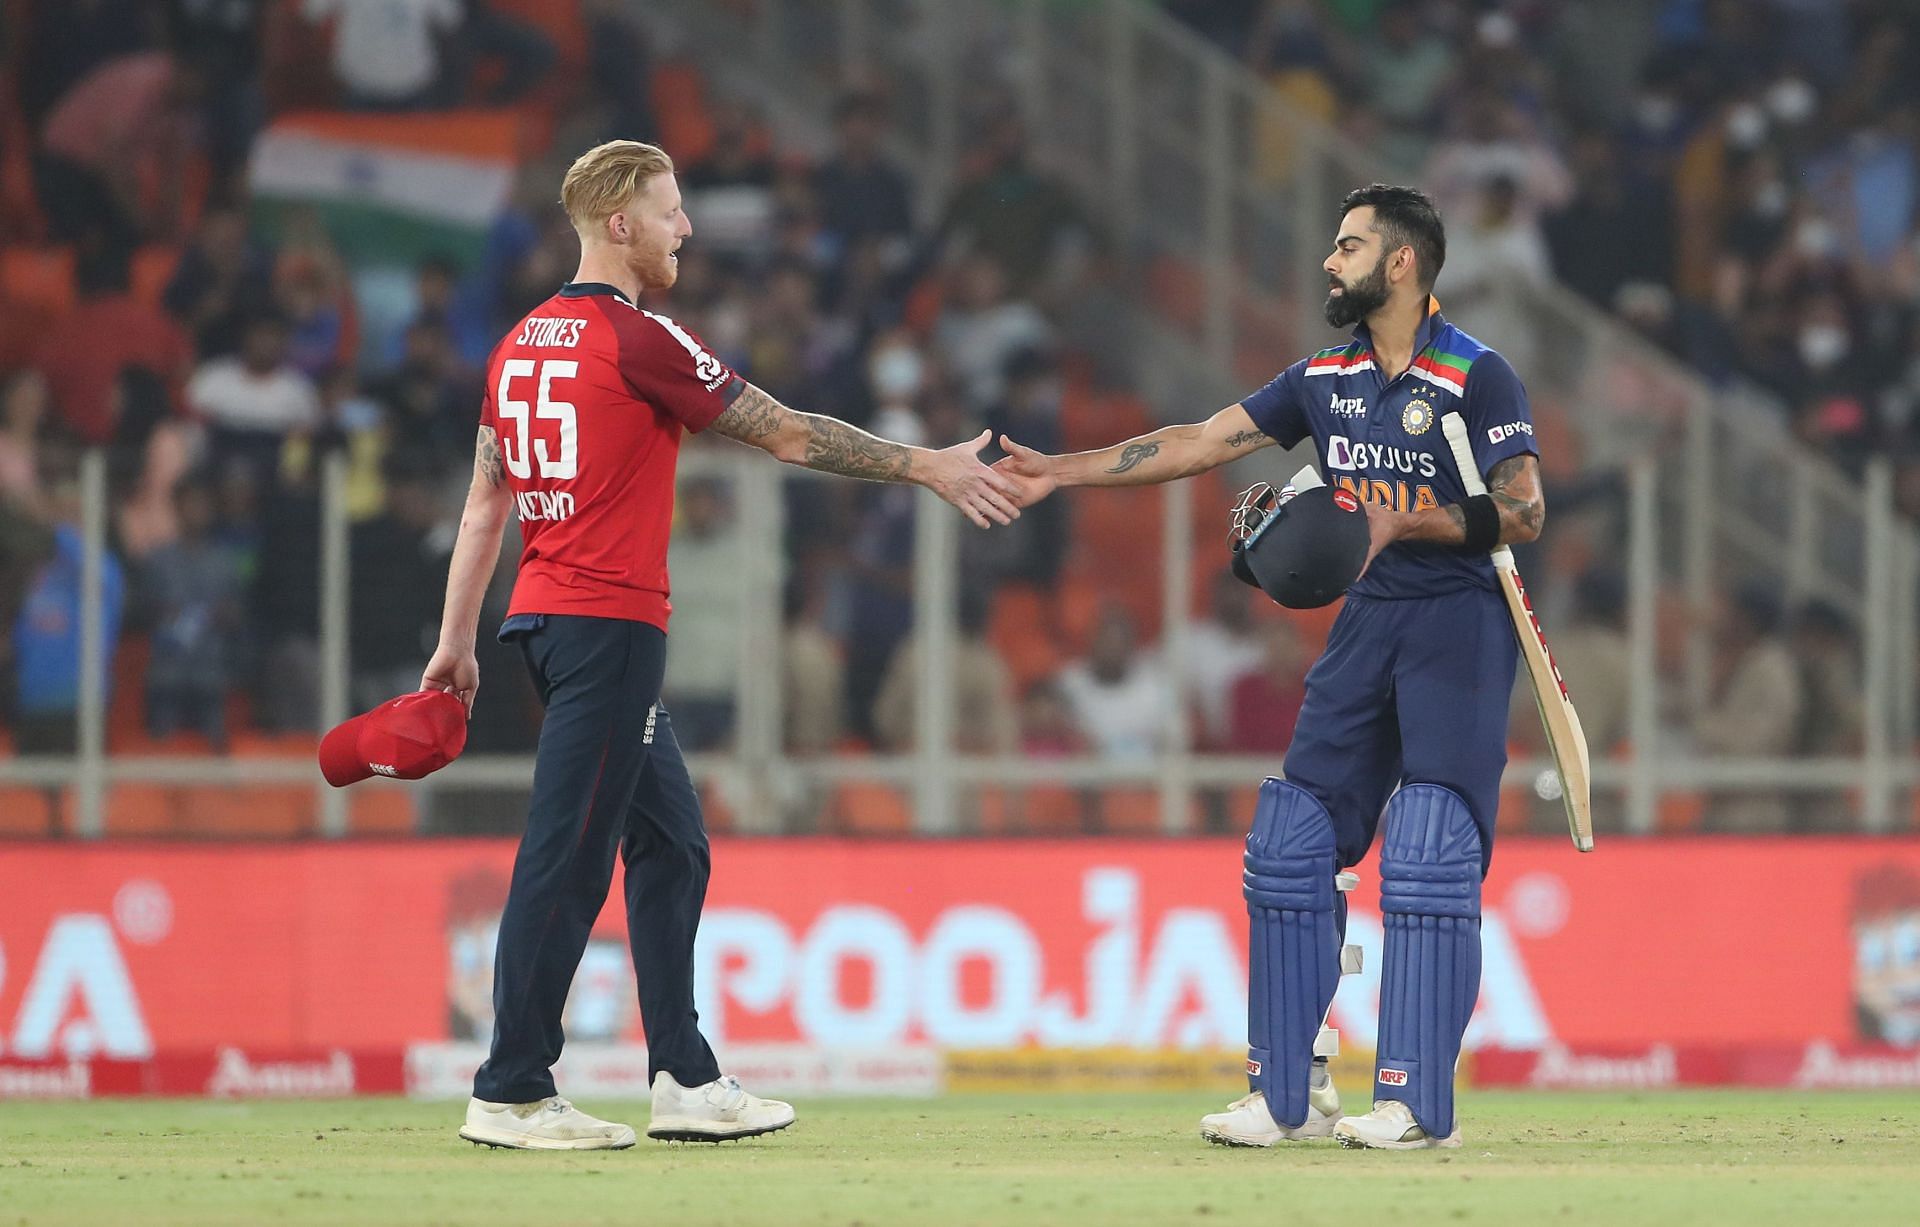 Ben Stokes (left) and Virat Kohli during a T20I in India last year. Pic: Getty Images